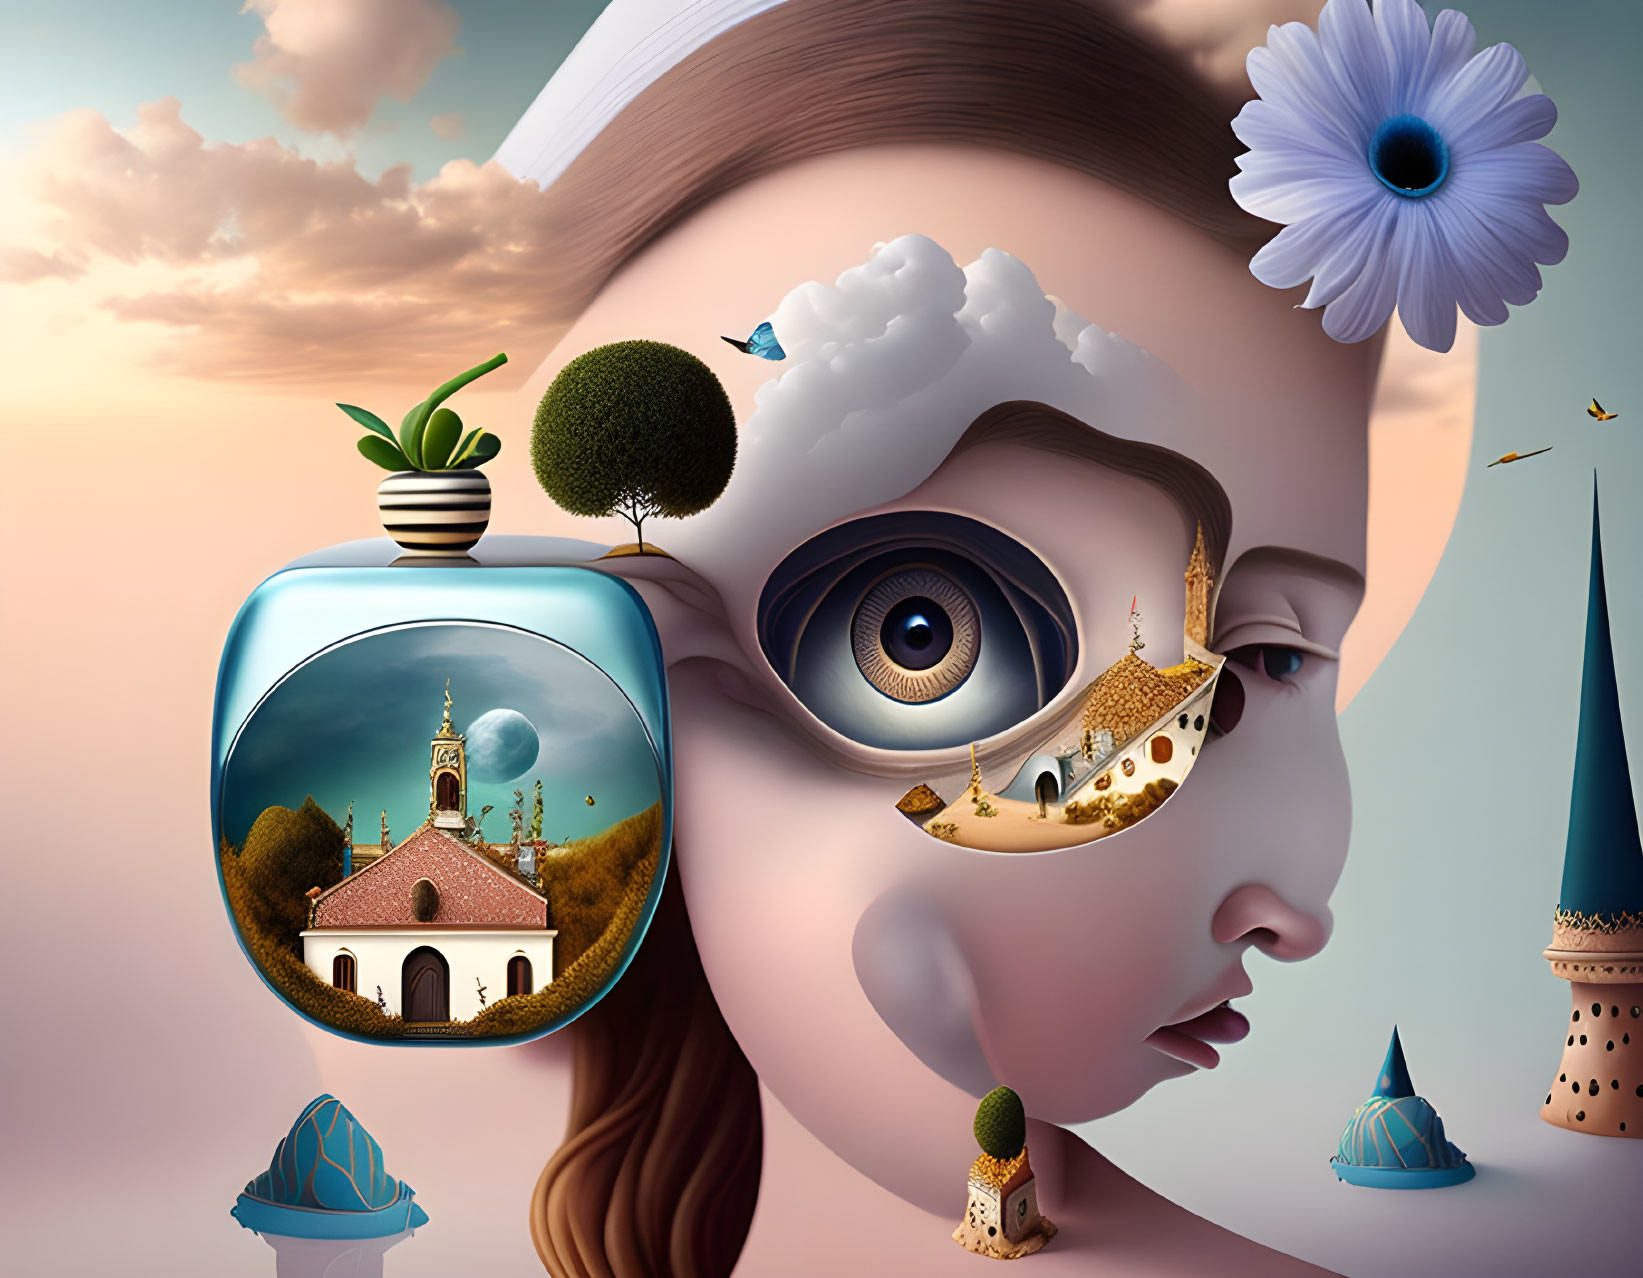 Surreal woman's face merges with landscapes, church scene in thought bubble, ship near eye.